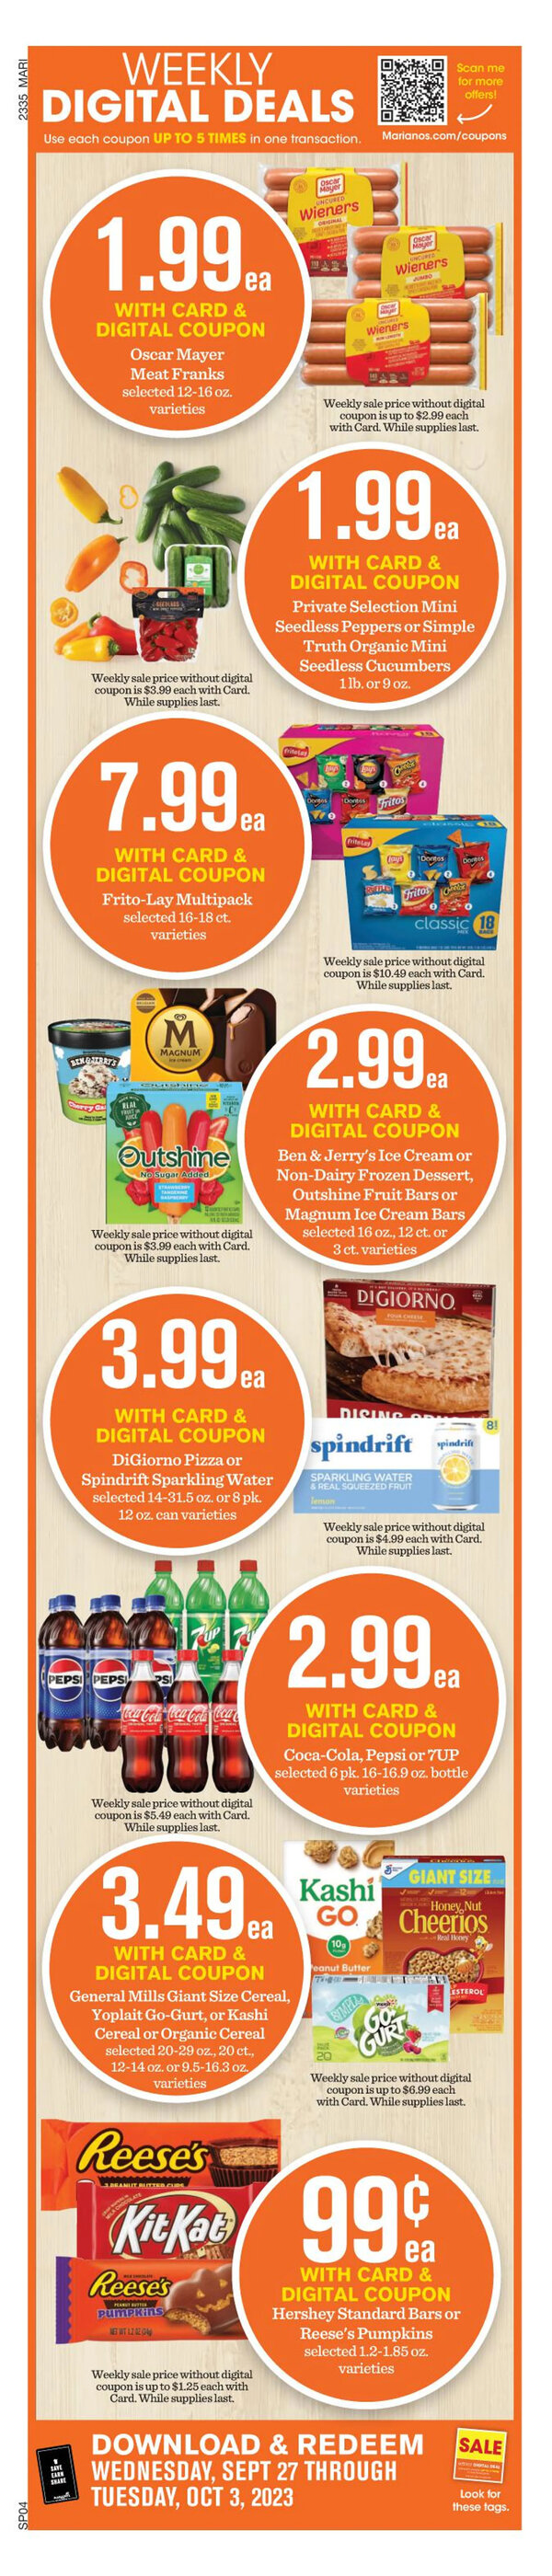 Marianos Weekly Ad Preview: (October 4 - October 10 2023)